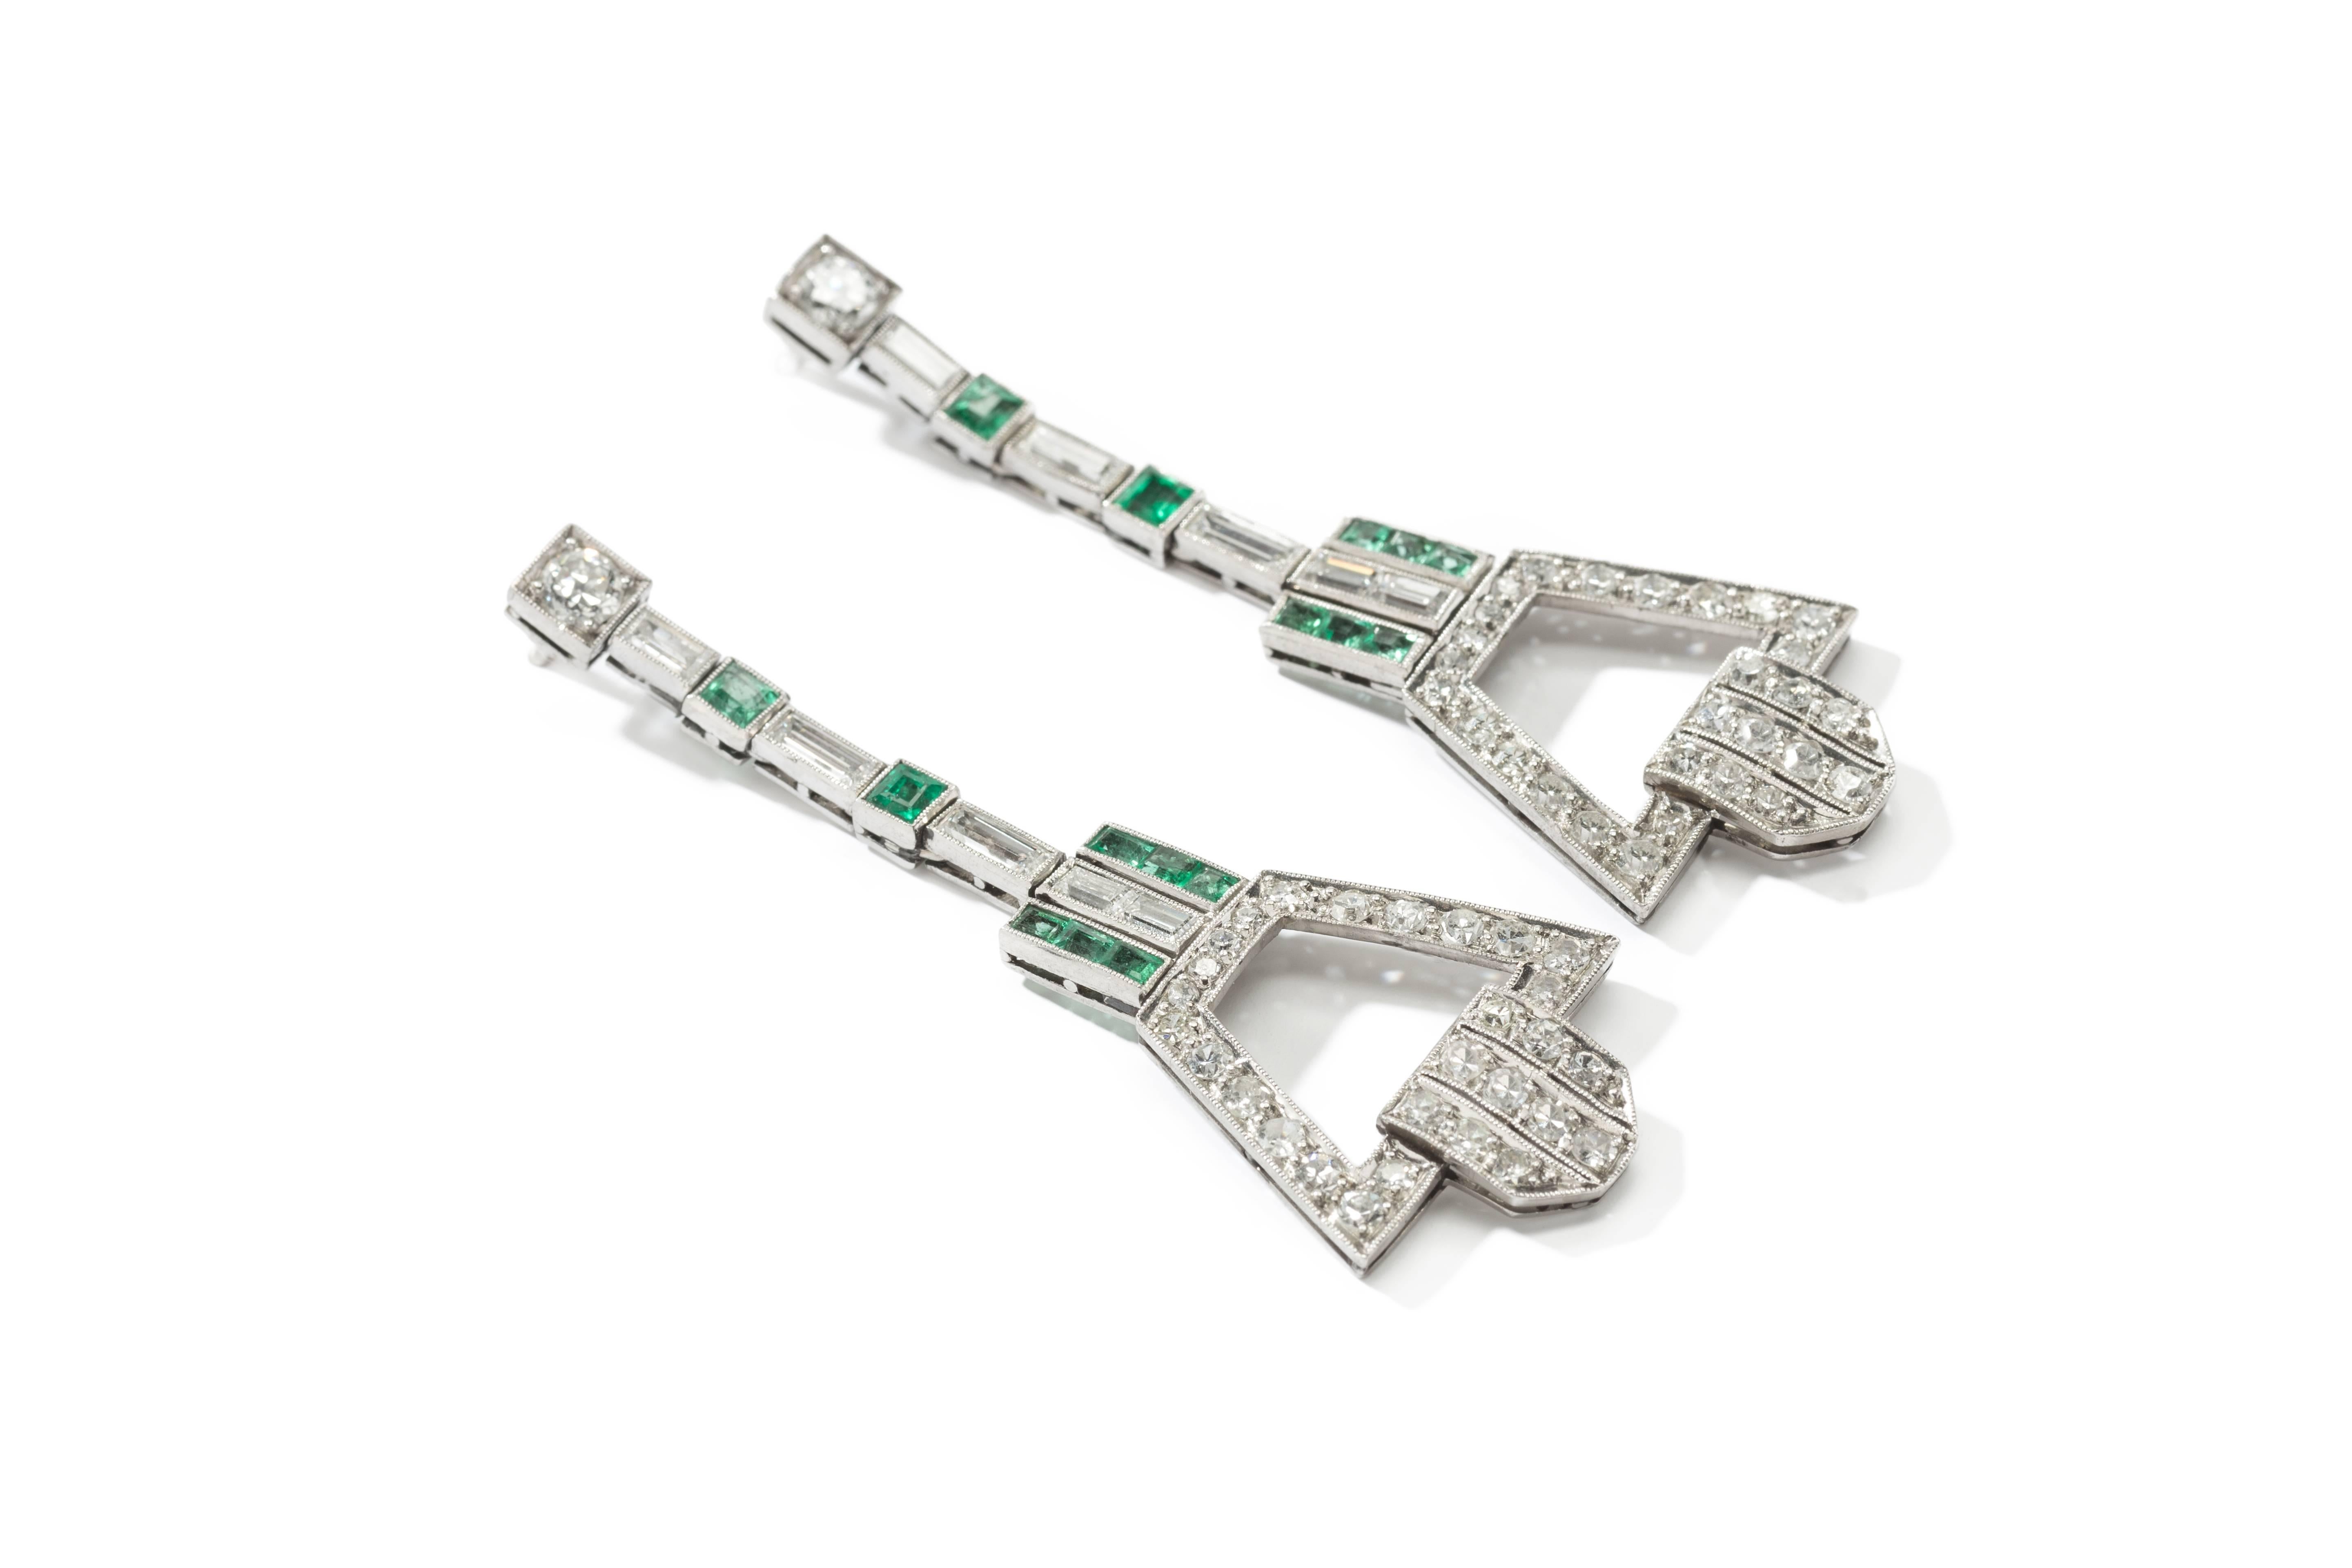 Set with 56 diamonds weighing circa 2,24 ct., 2 brilliant-cut diamonds ca. 0,55 ct. and 10 baguette-cut diamonds weighing ca. 1,4 ct. Accented by 16 emeralds weighing approximately 1,0 ct. Mounted in Platinum. Total weight: 14,47 grams. Length: 2.36